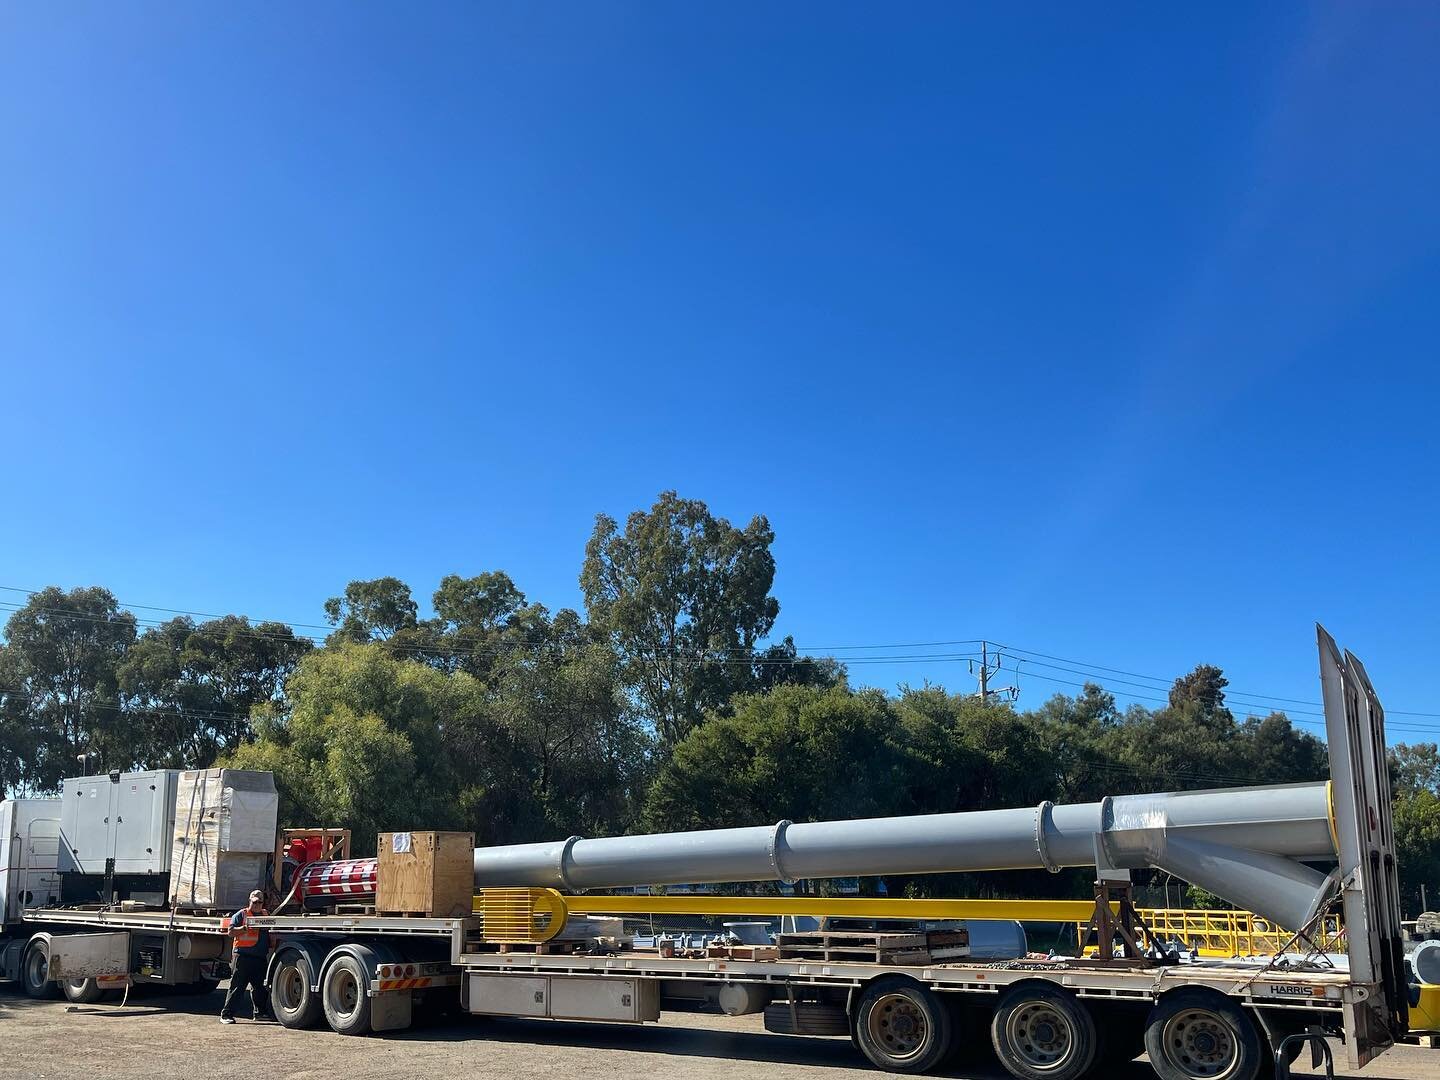 #ornelpumps heading north to #condamine for a new #irrigation installation. #manufacturing #riverina